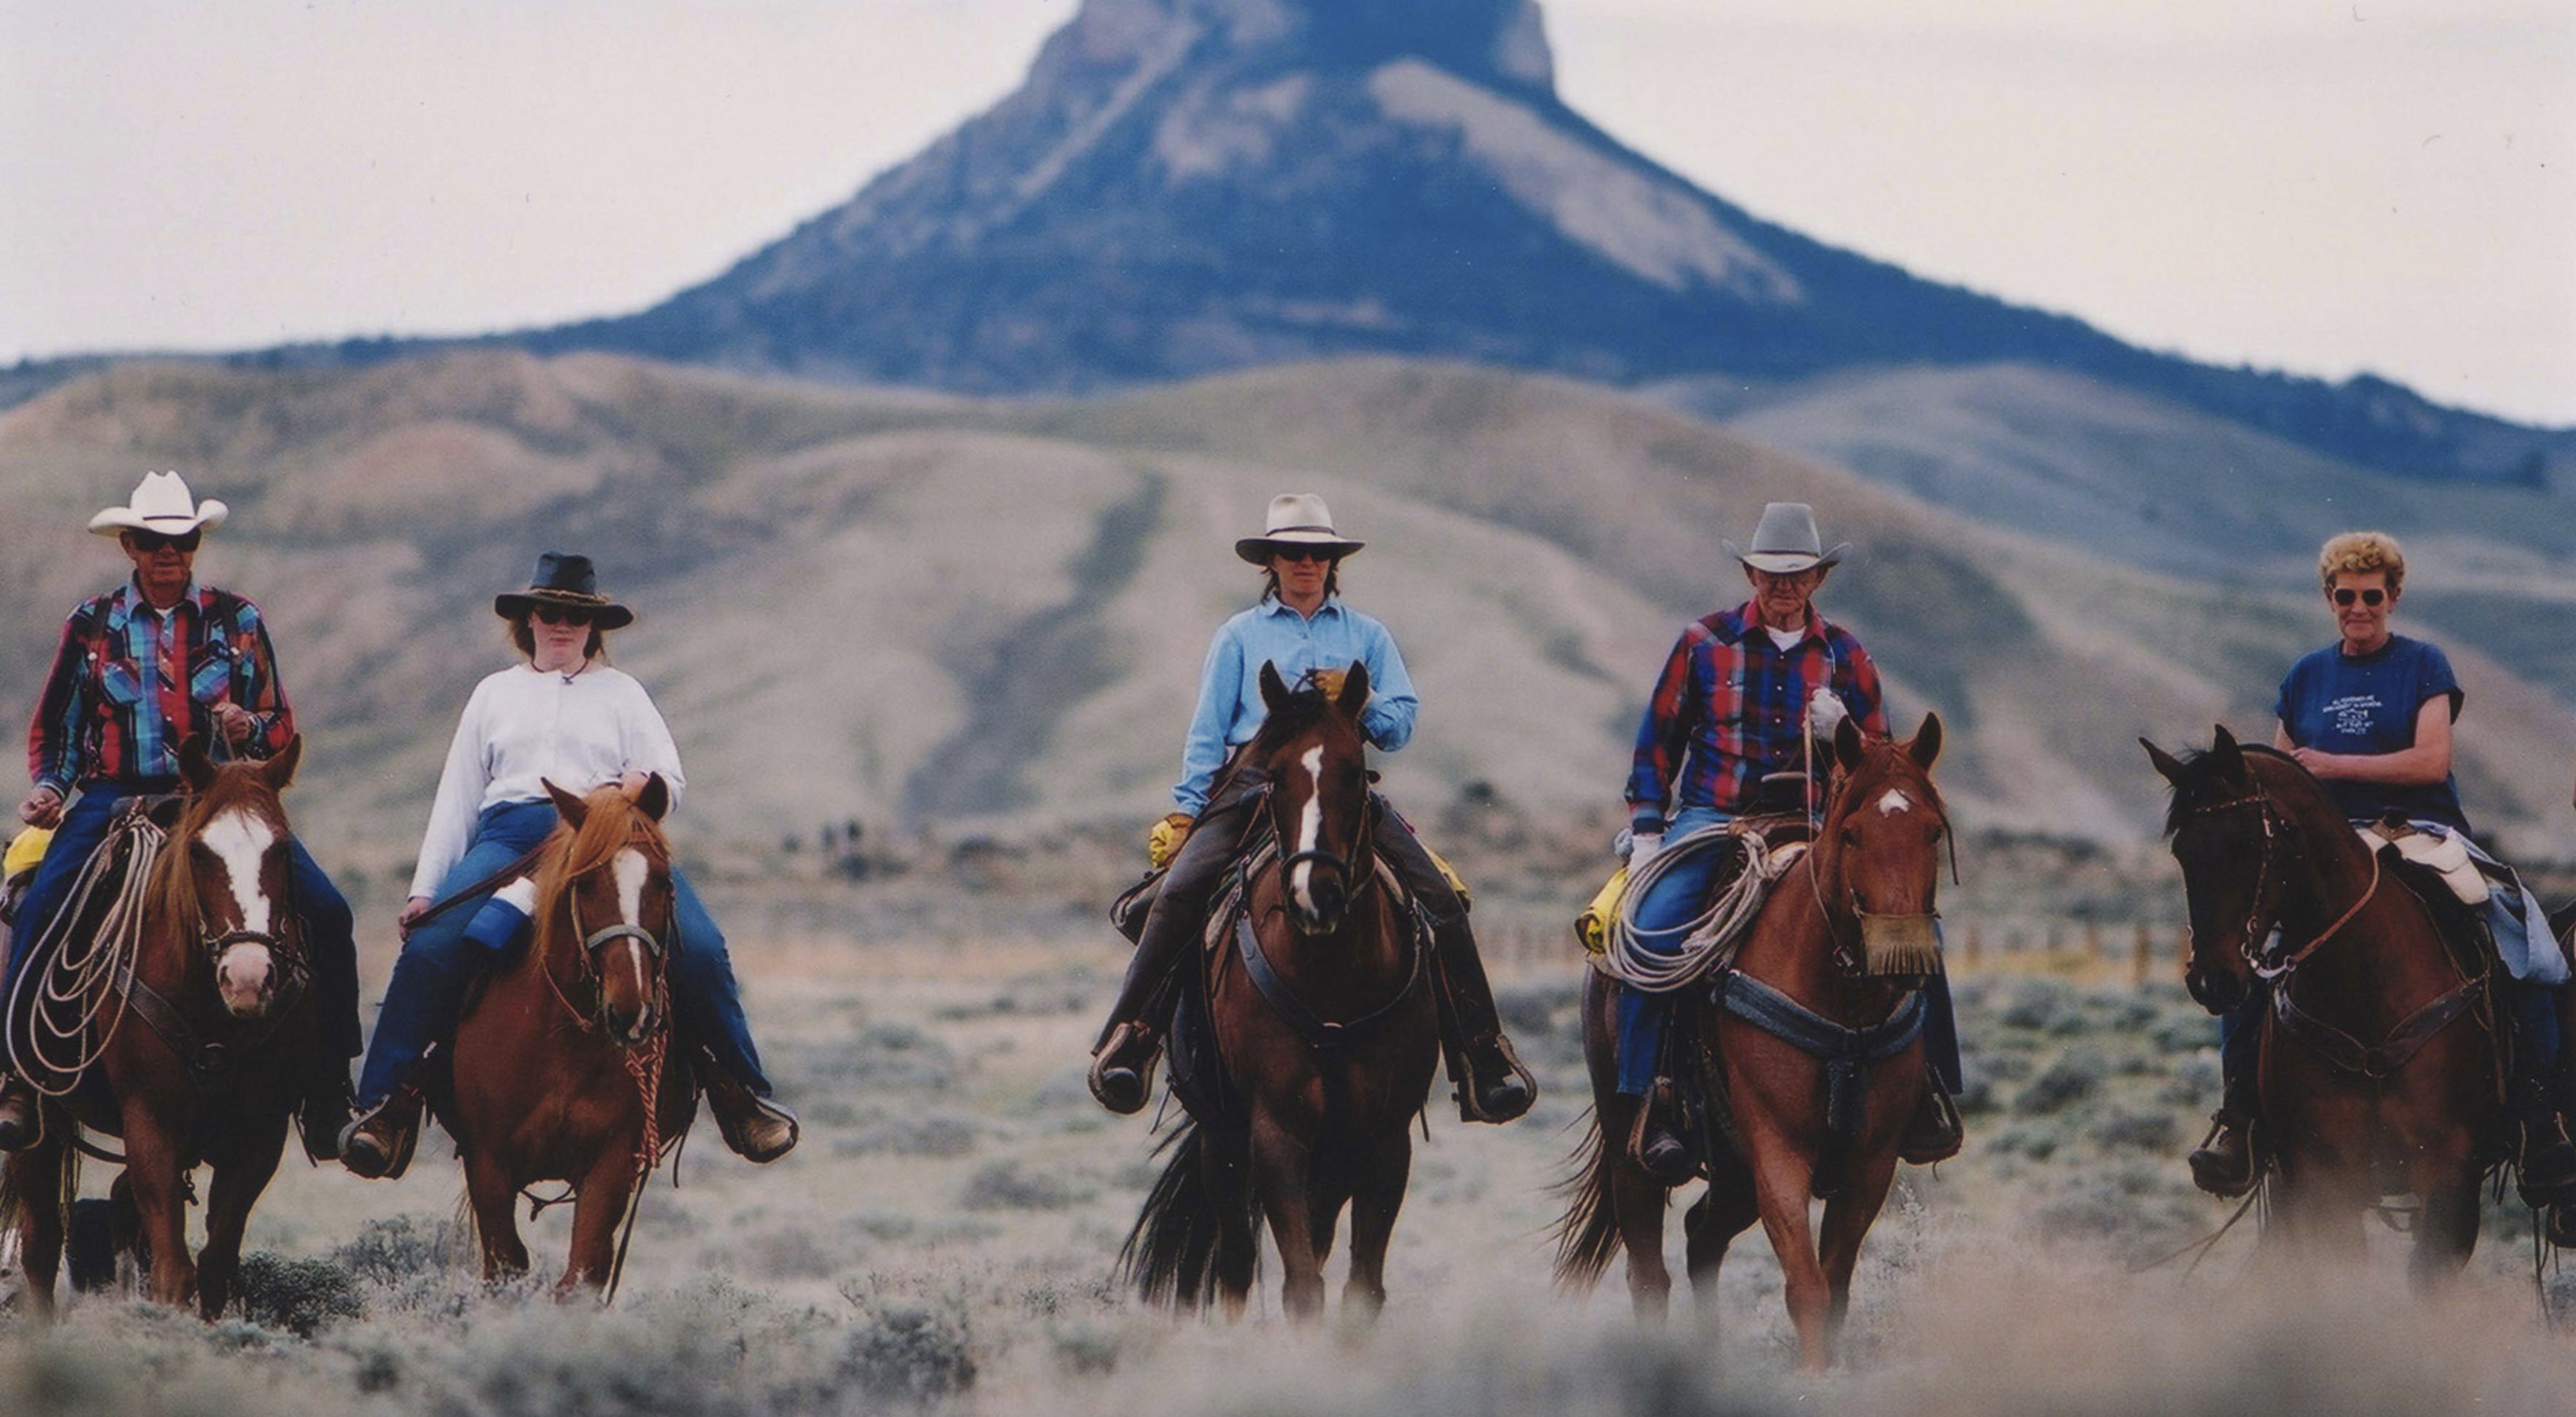 Five people on horseback riding towards the camera with a mountain in the background.